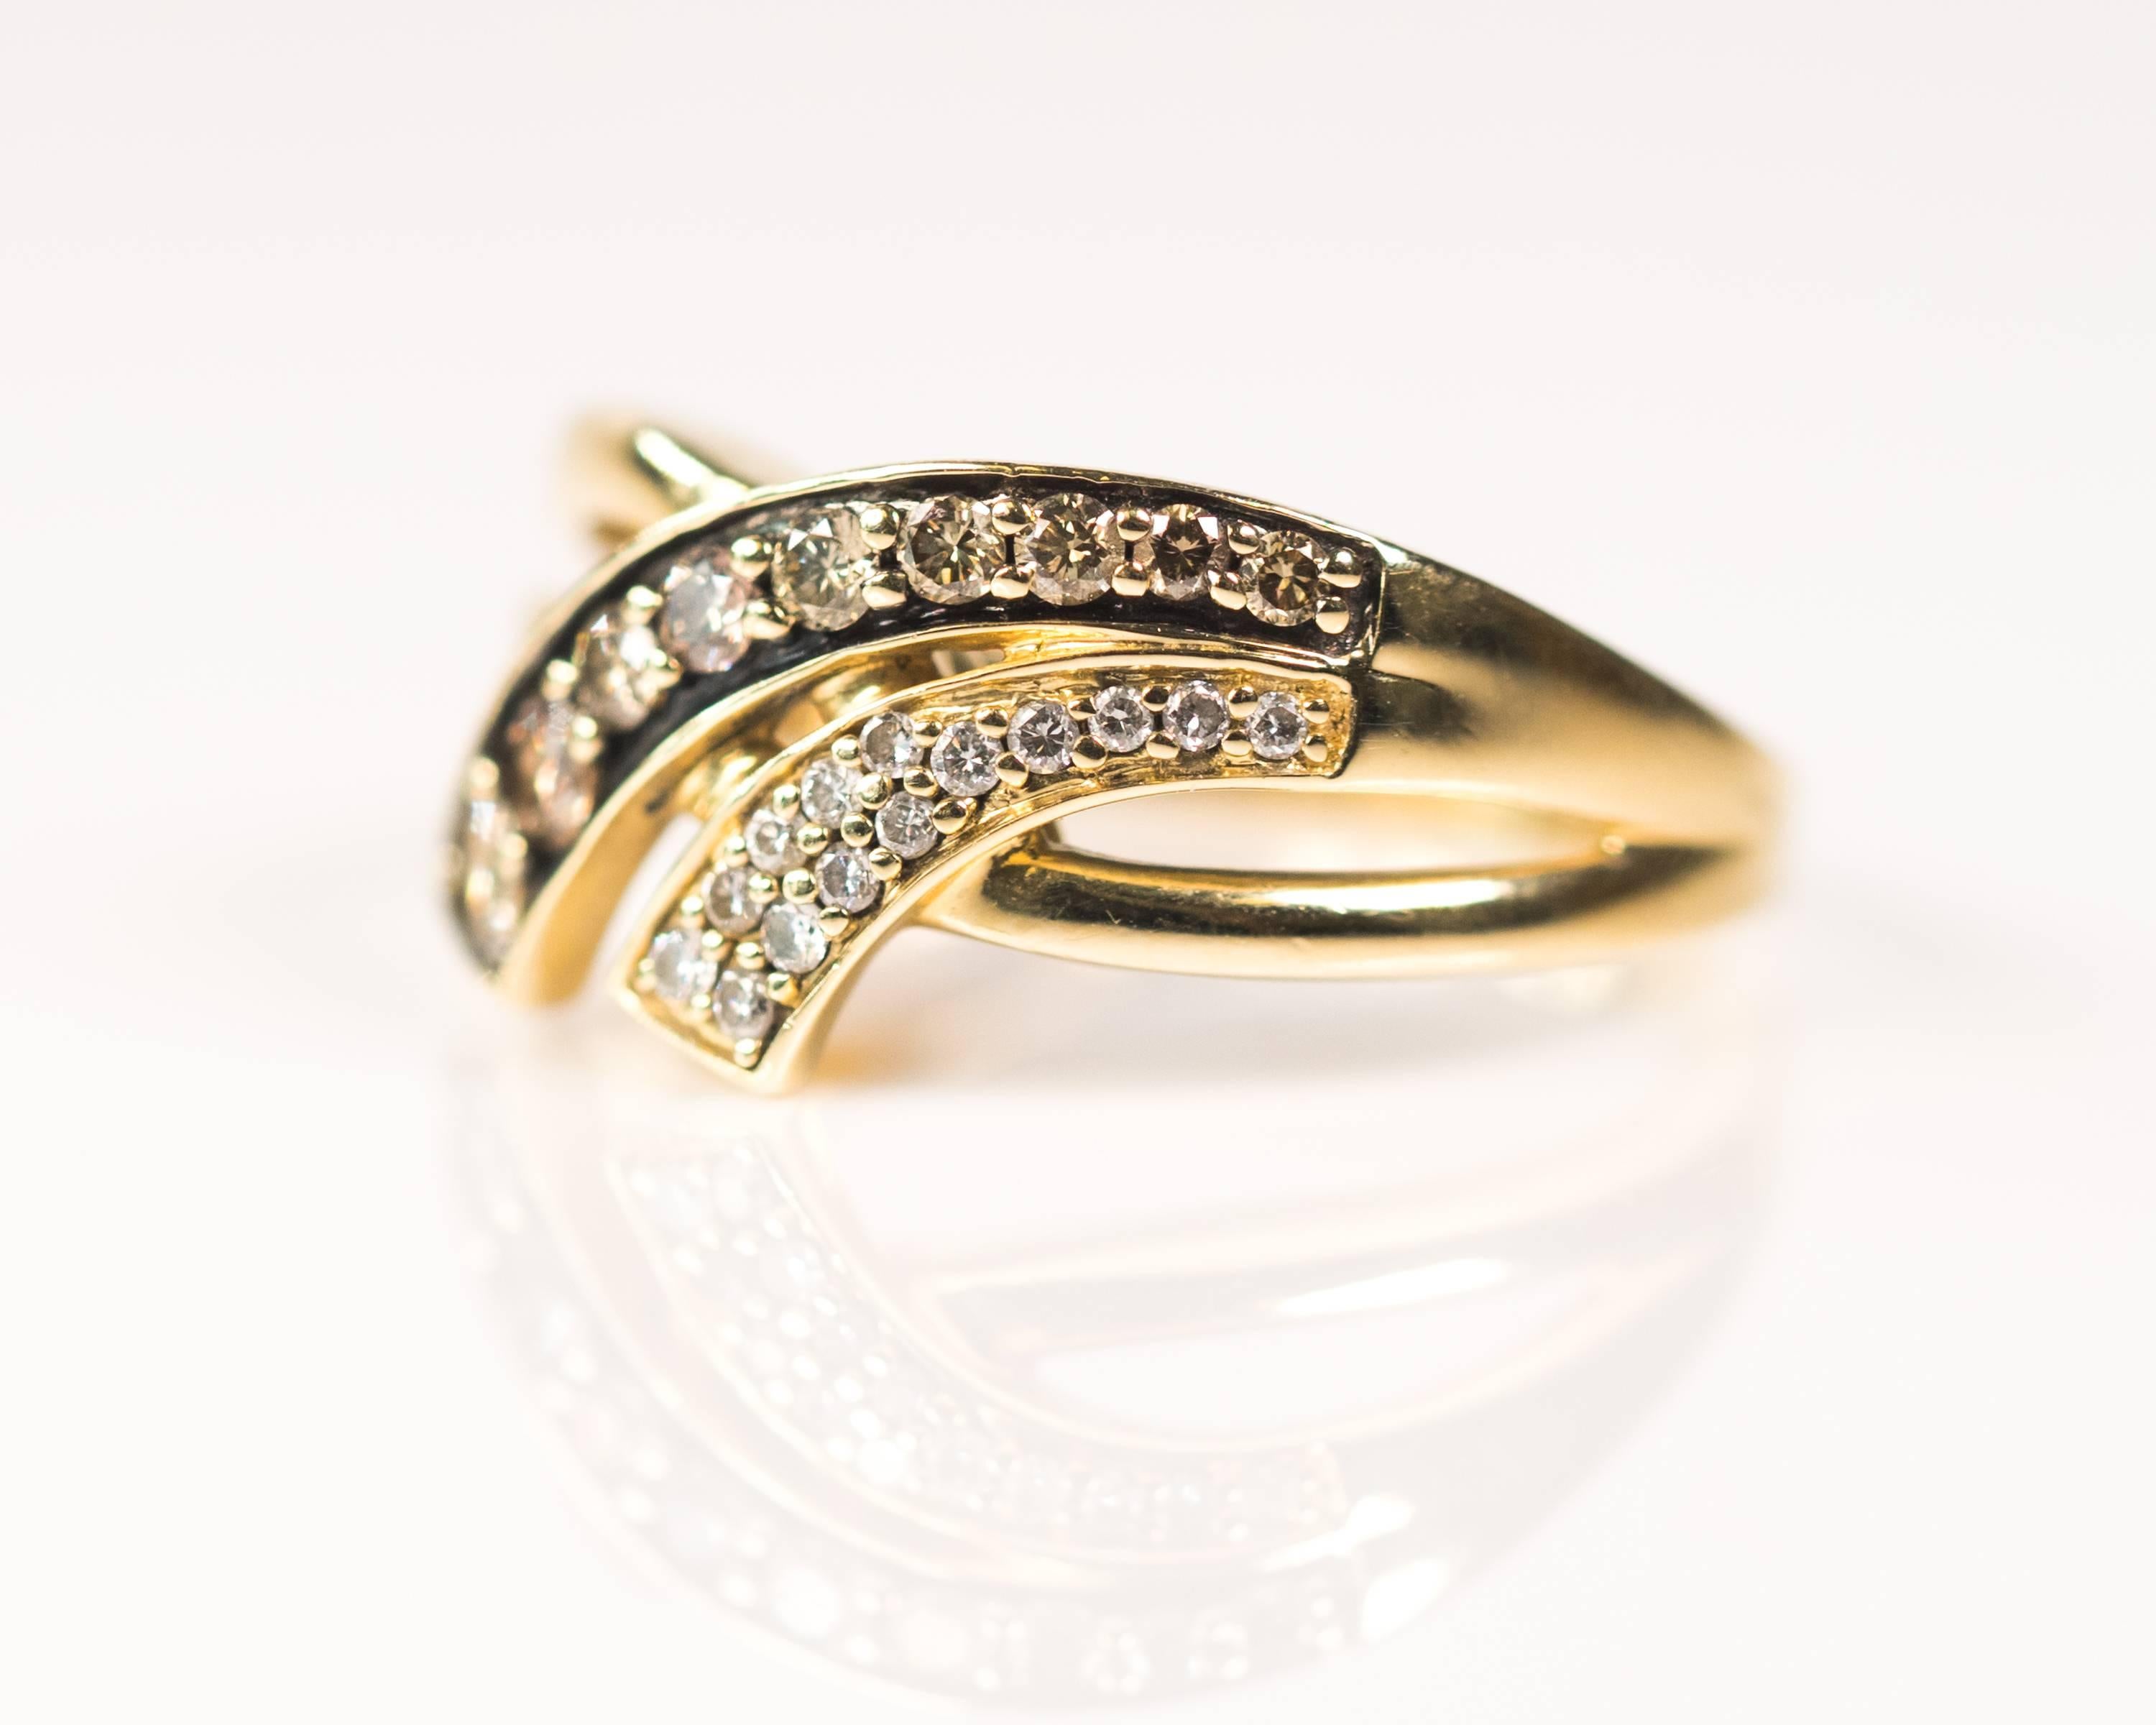 Le Vian Chocolate and White Diamond 14 Karat Yellow Gold Ring

Features 0.30 carats total weight of Diamonds and 14 Karat Yellow Gold Split Shank. The front of the ring has a split crossover ribbon design. The top ribbon segment is set with